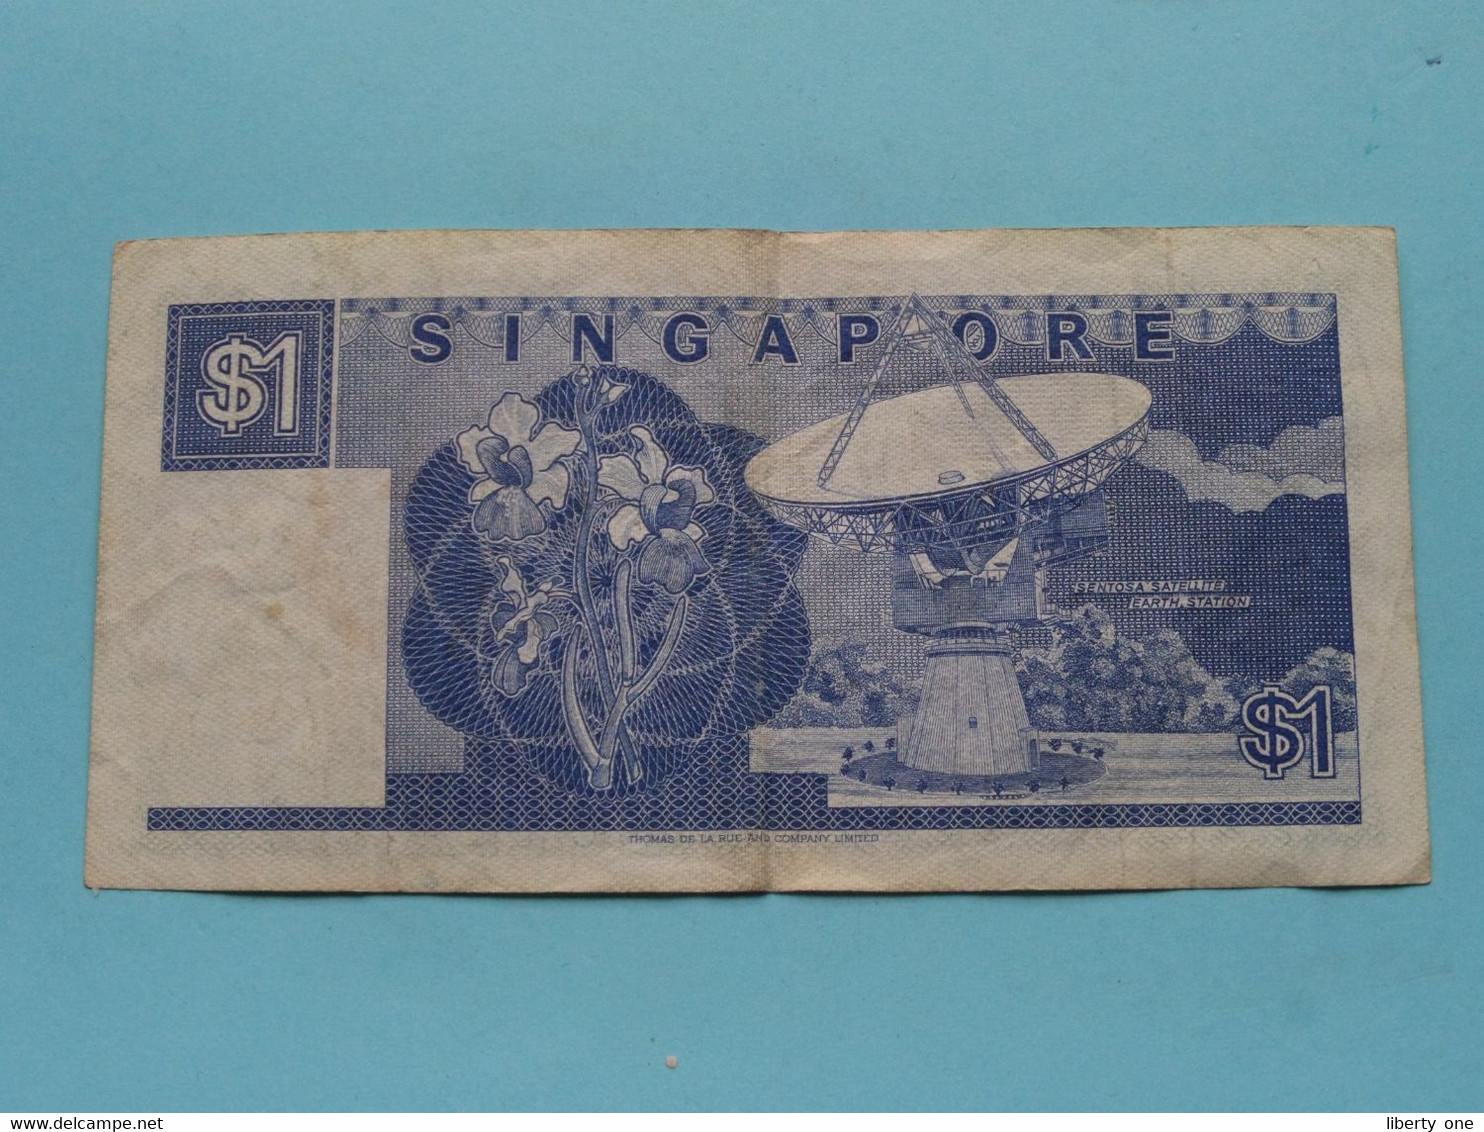 1 $ > Singapore One Dollar - A32 255136 ( For Grade, Please See Photo ) Used ! - Singapur